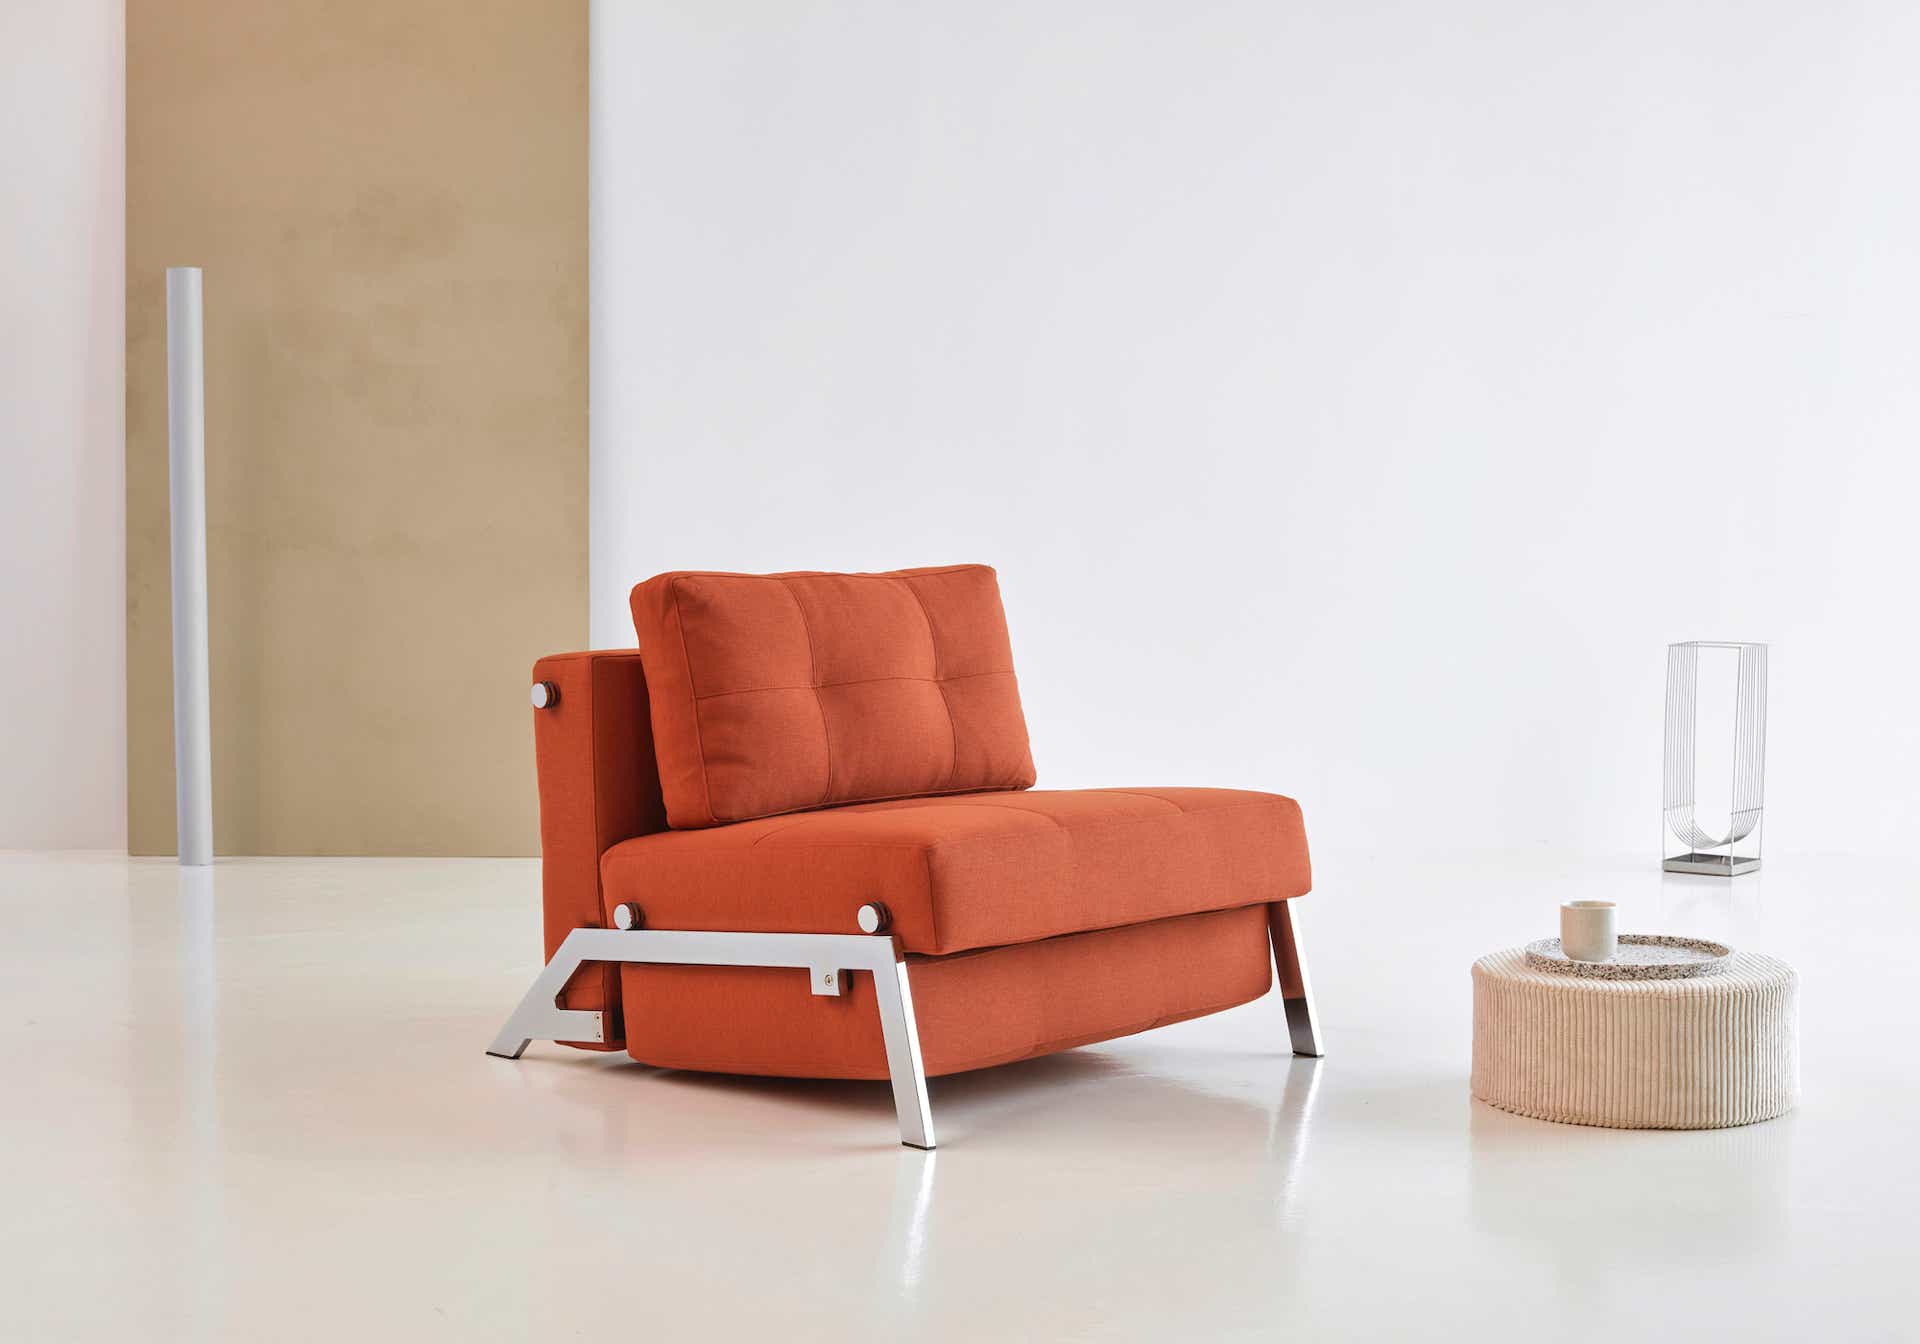 Canapé et Fauteuil Convertible Cubed Per Weiss, Oliver & Lukas WeissKrogh, 2009/2015/2019